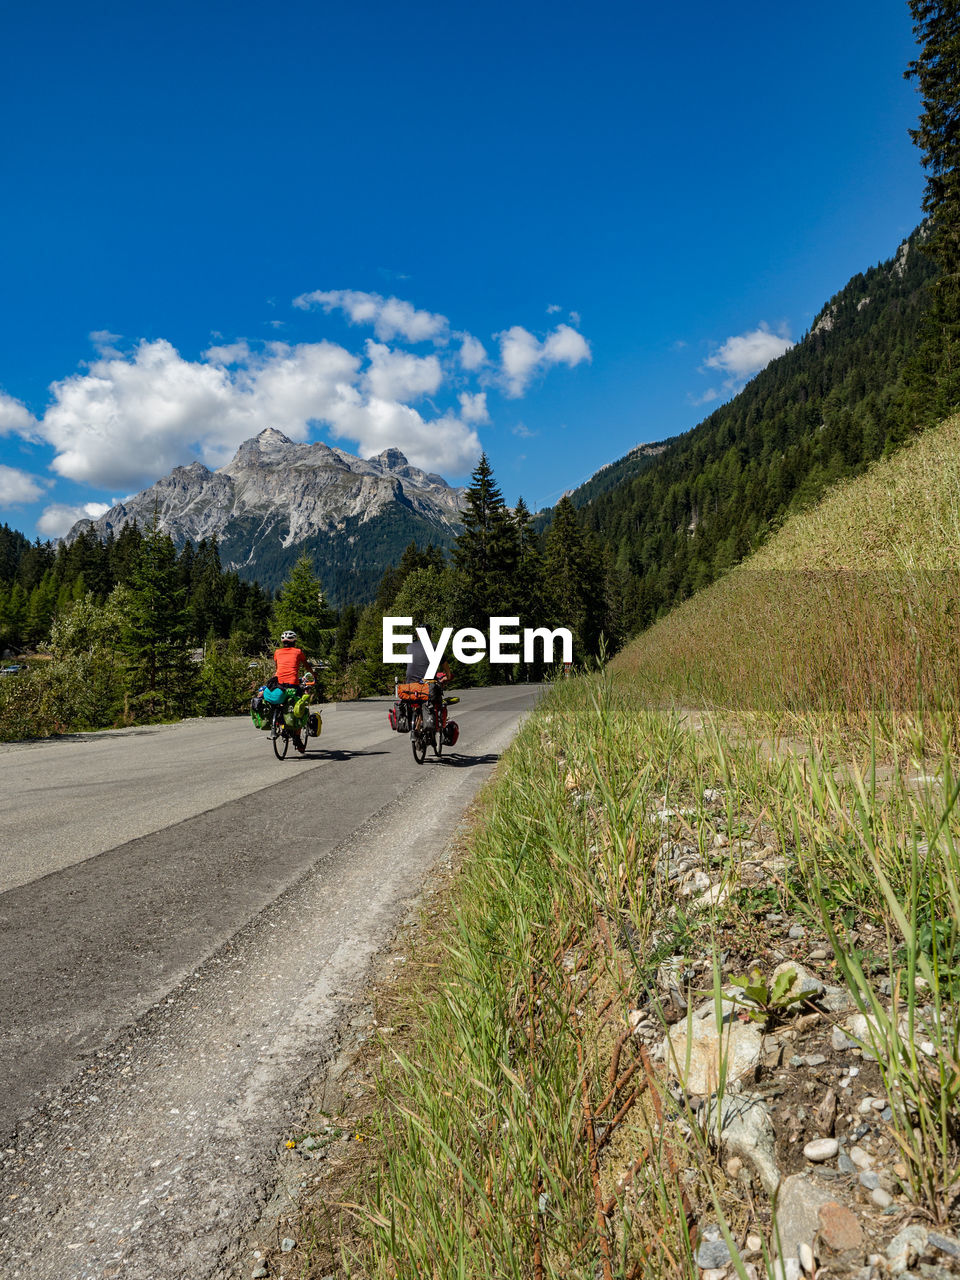 People riding road by mountains against blue sky